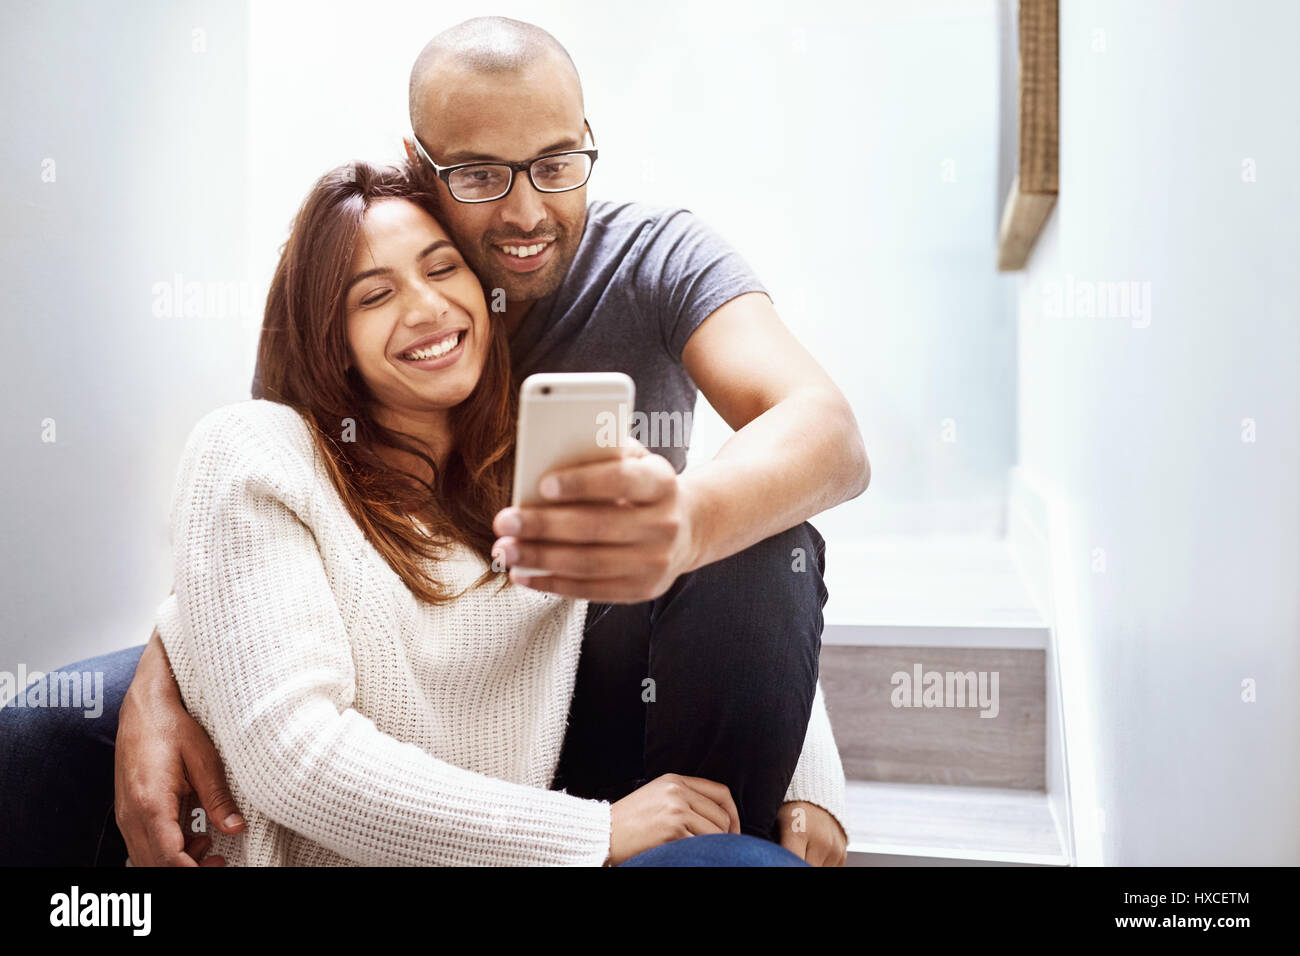 Smiling couple with camera phone taking selfie on stairs Stock Photo